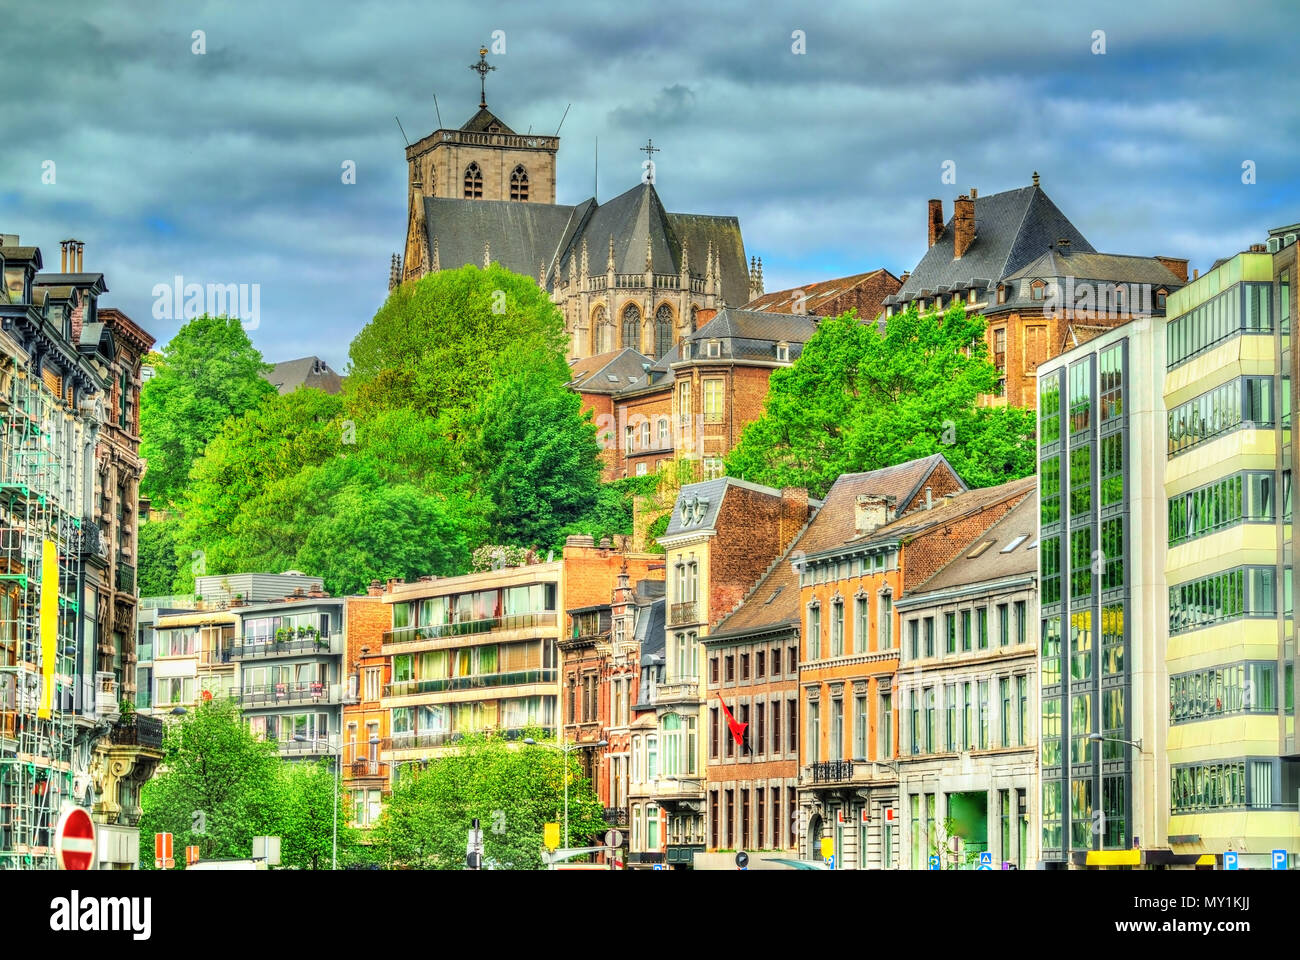 Typical buildings in the city centre of Liege, Belgium Stock Photo - Alamy